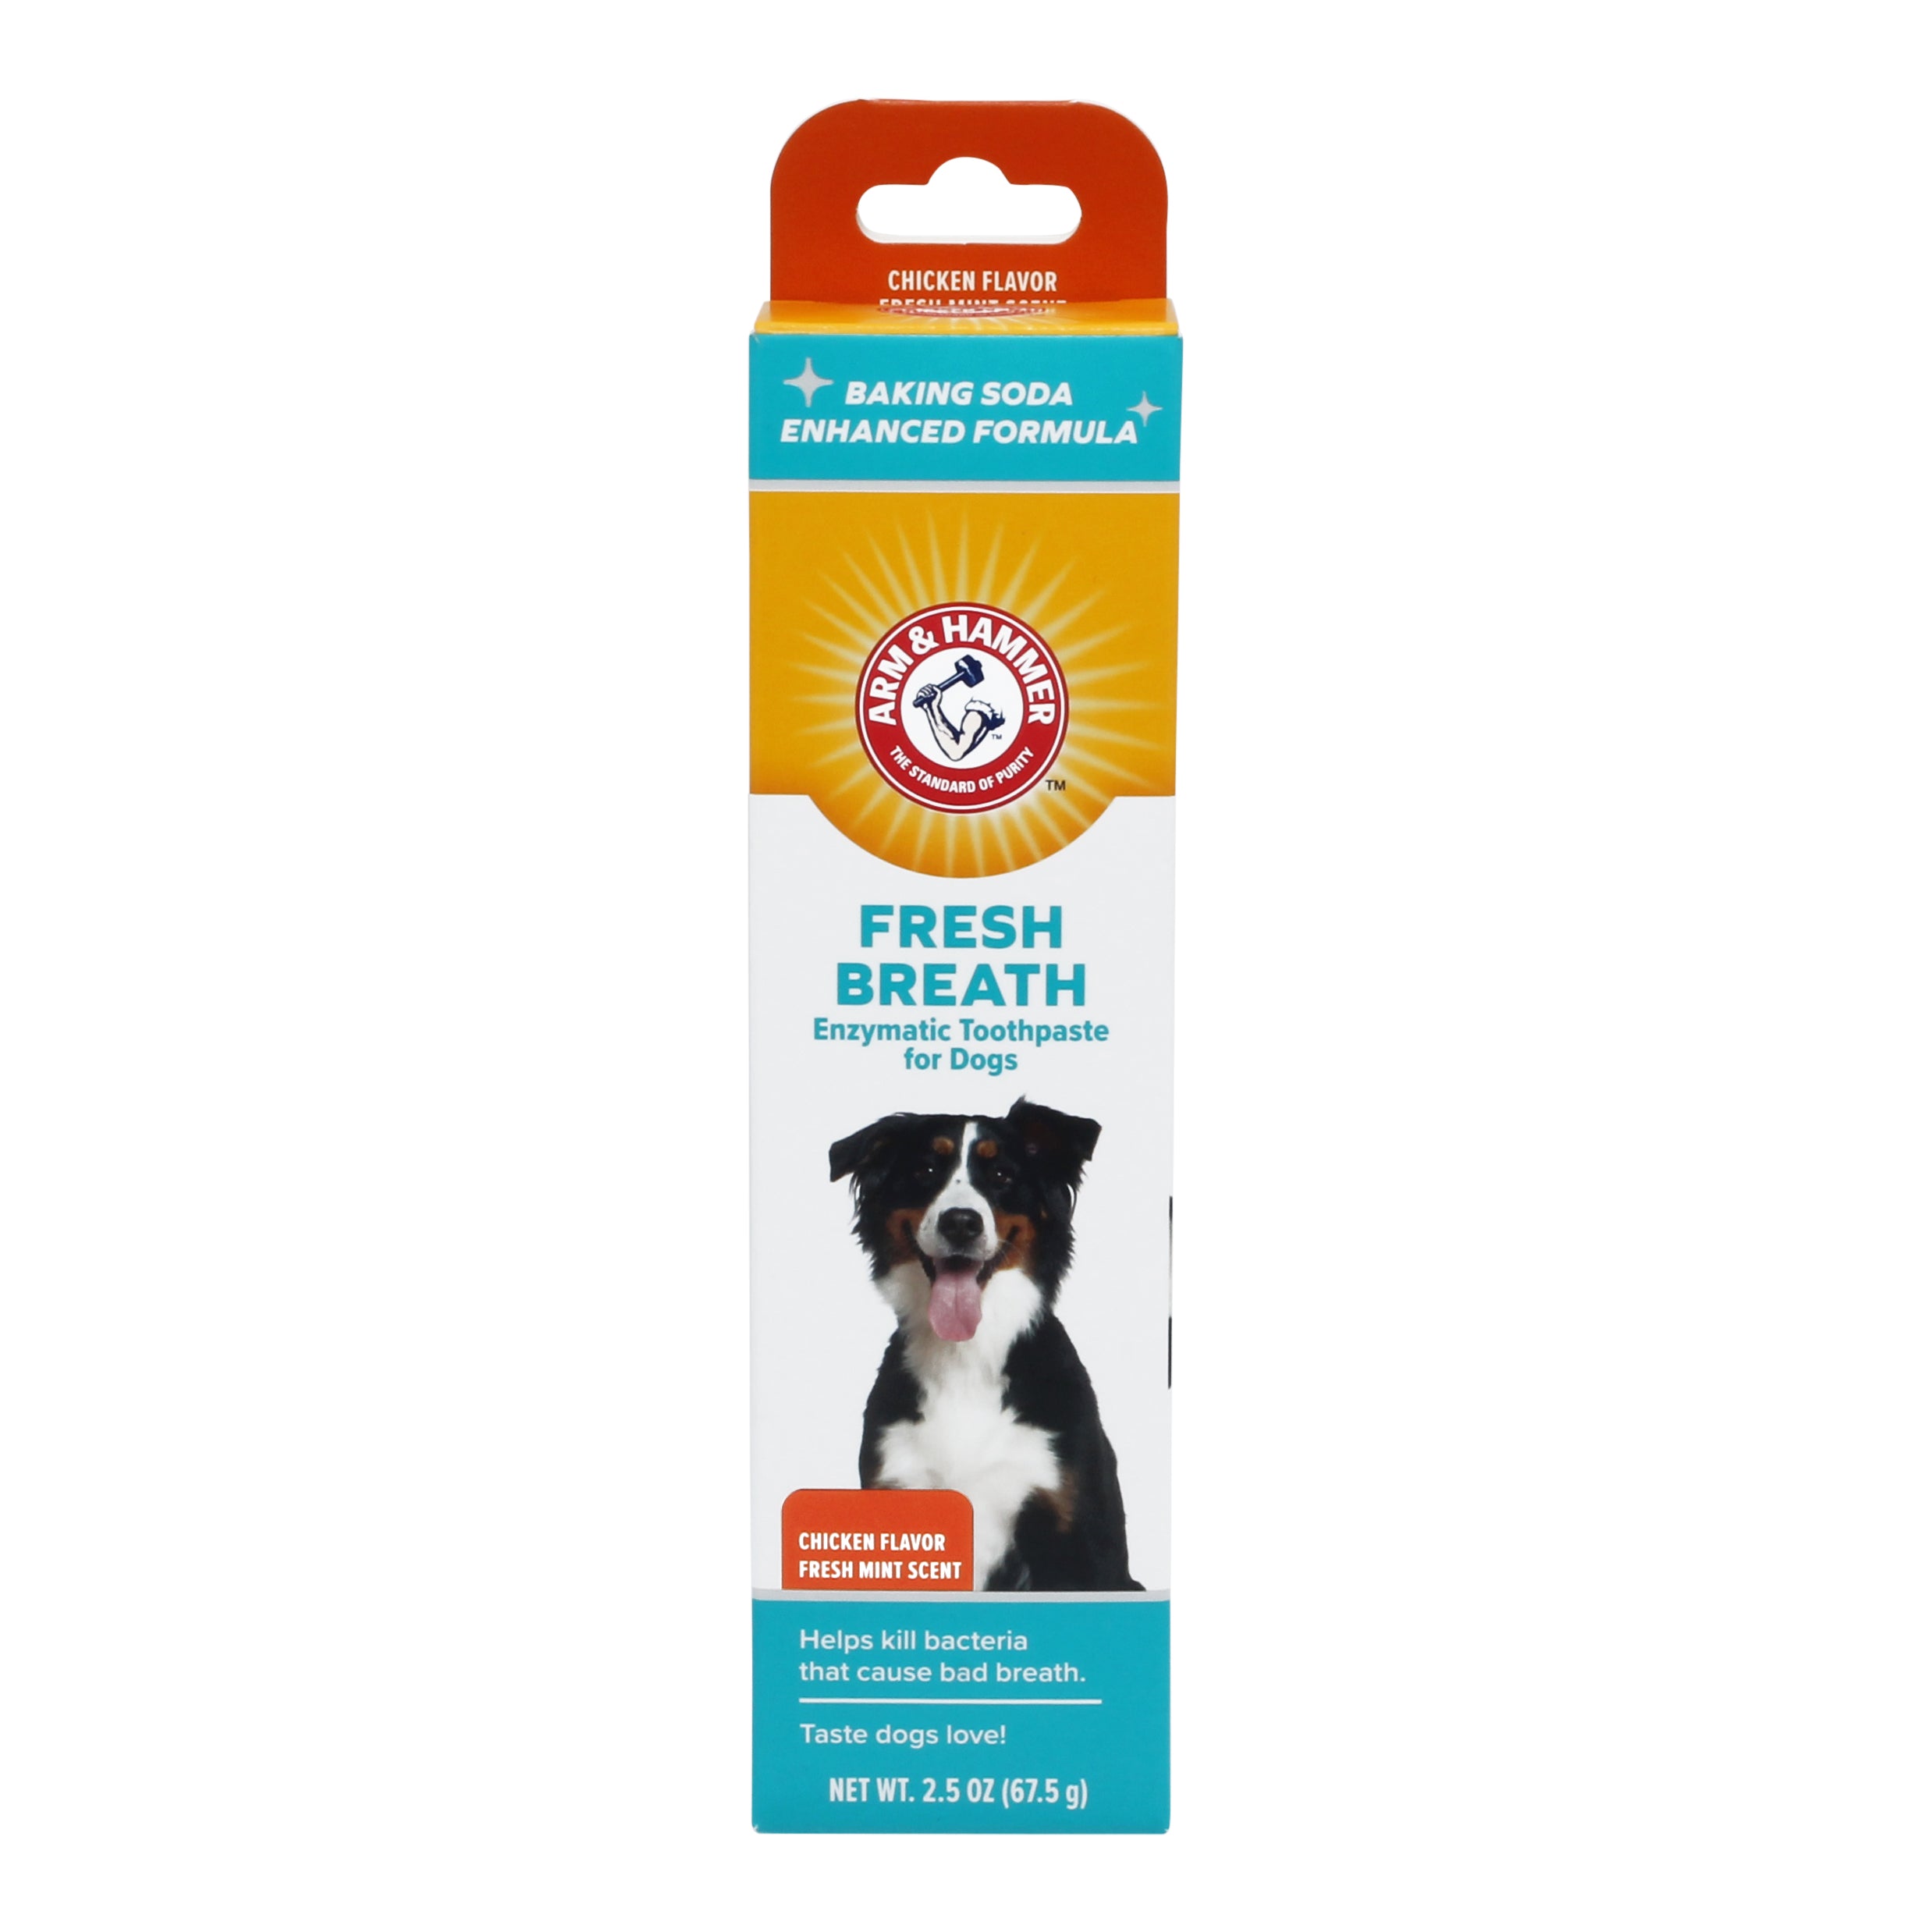 ARM & HAMMER FRESH BREATH ENZYMATIC TOOTHPASTE FOR DOGS, CHICKEN FLAVORR - Value Size 6.2oz